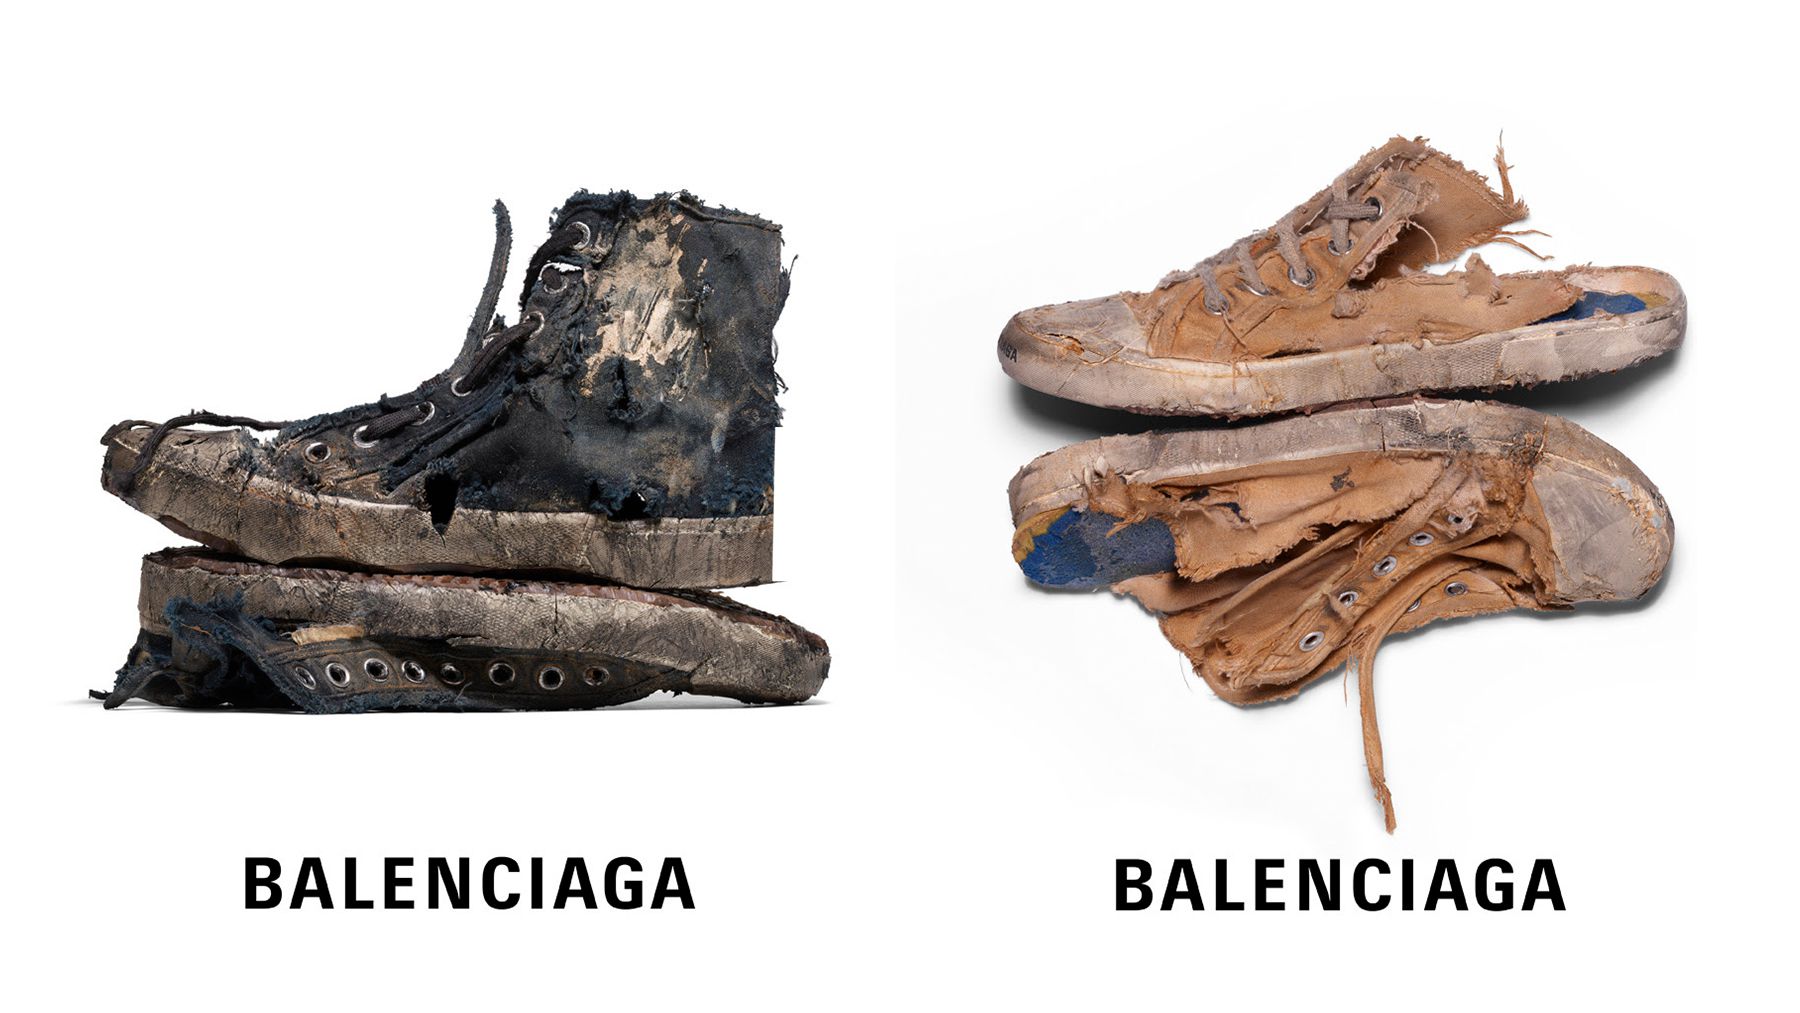 The Strategy Behind Balenciaga’s Destroyed Sneaker Stunt - Fashnfly